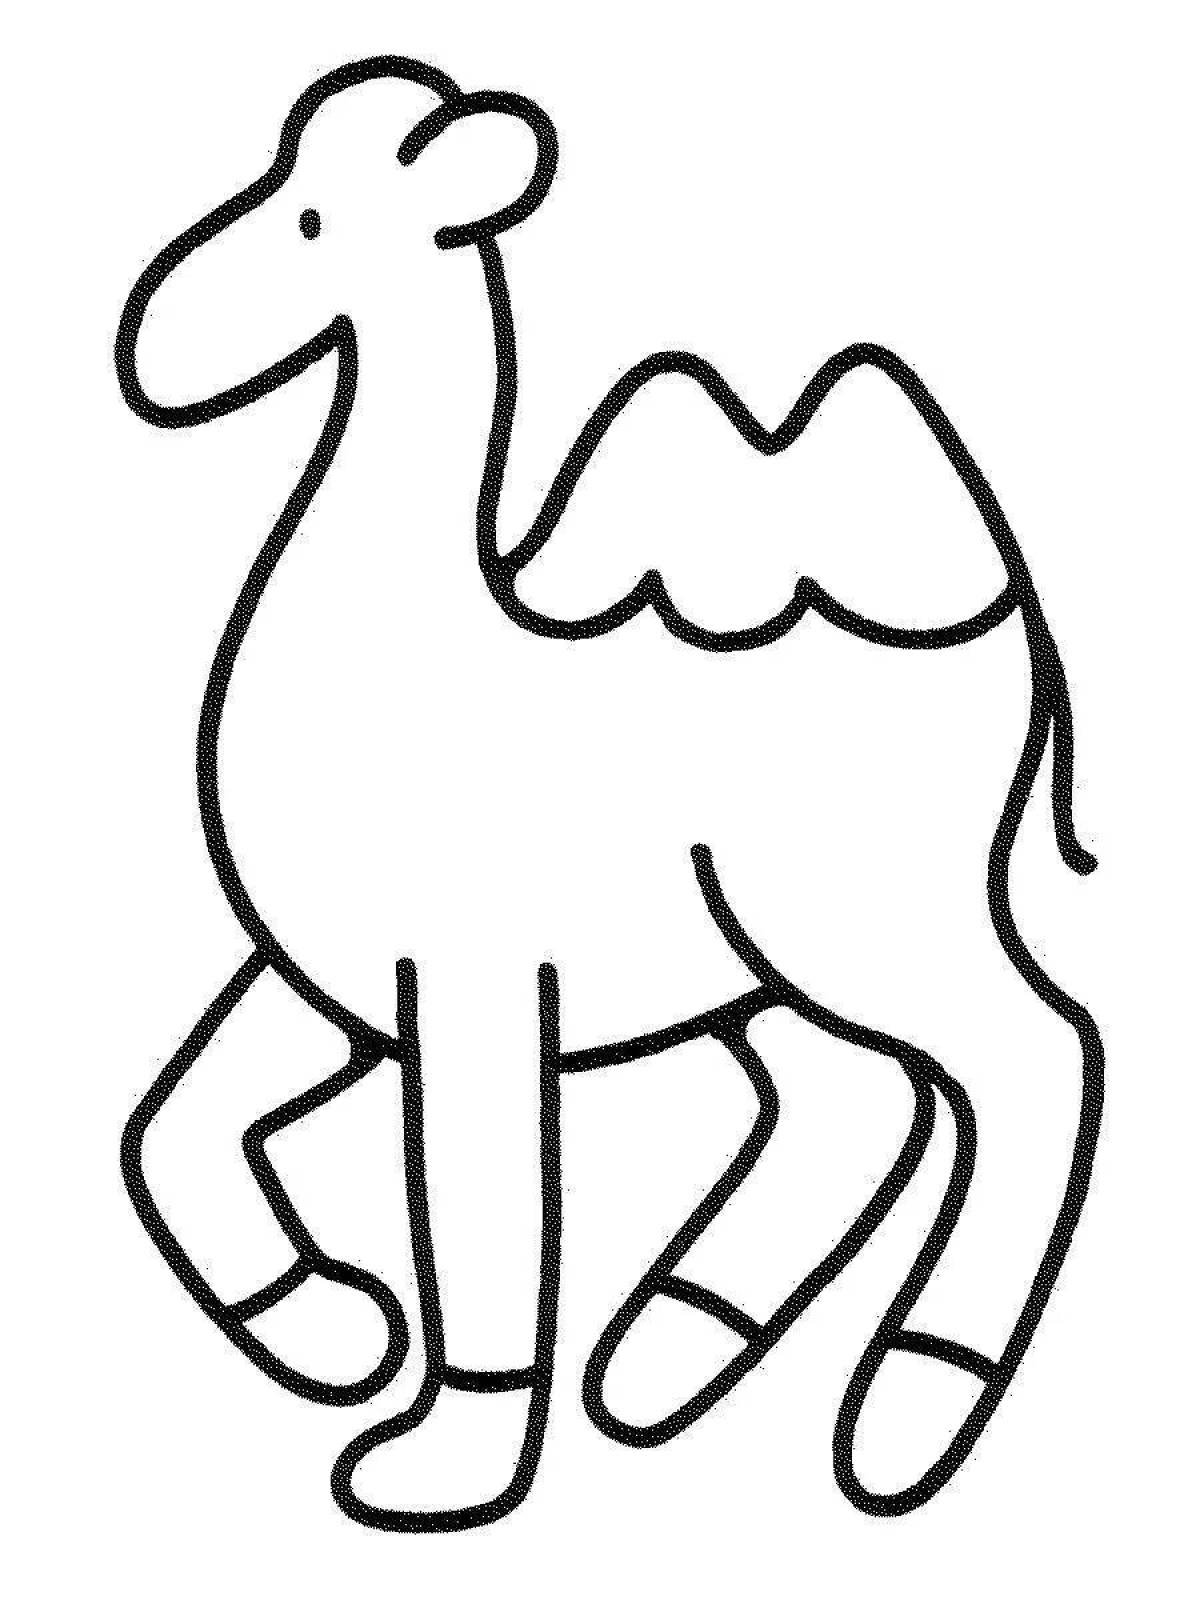 Coloring camel for children 6-7 years old